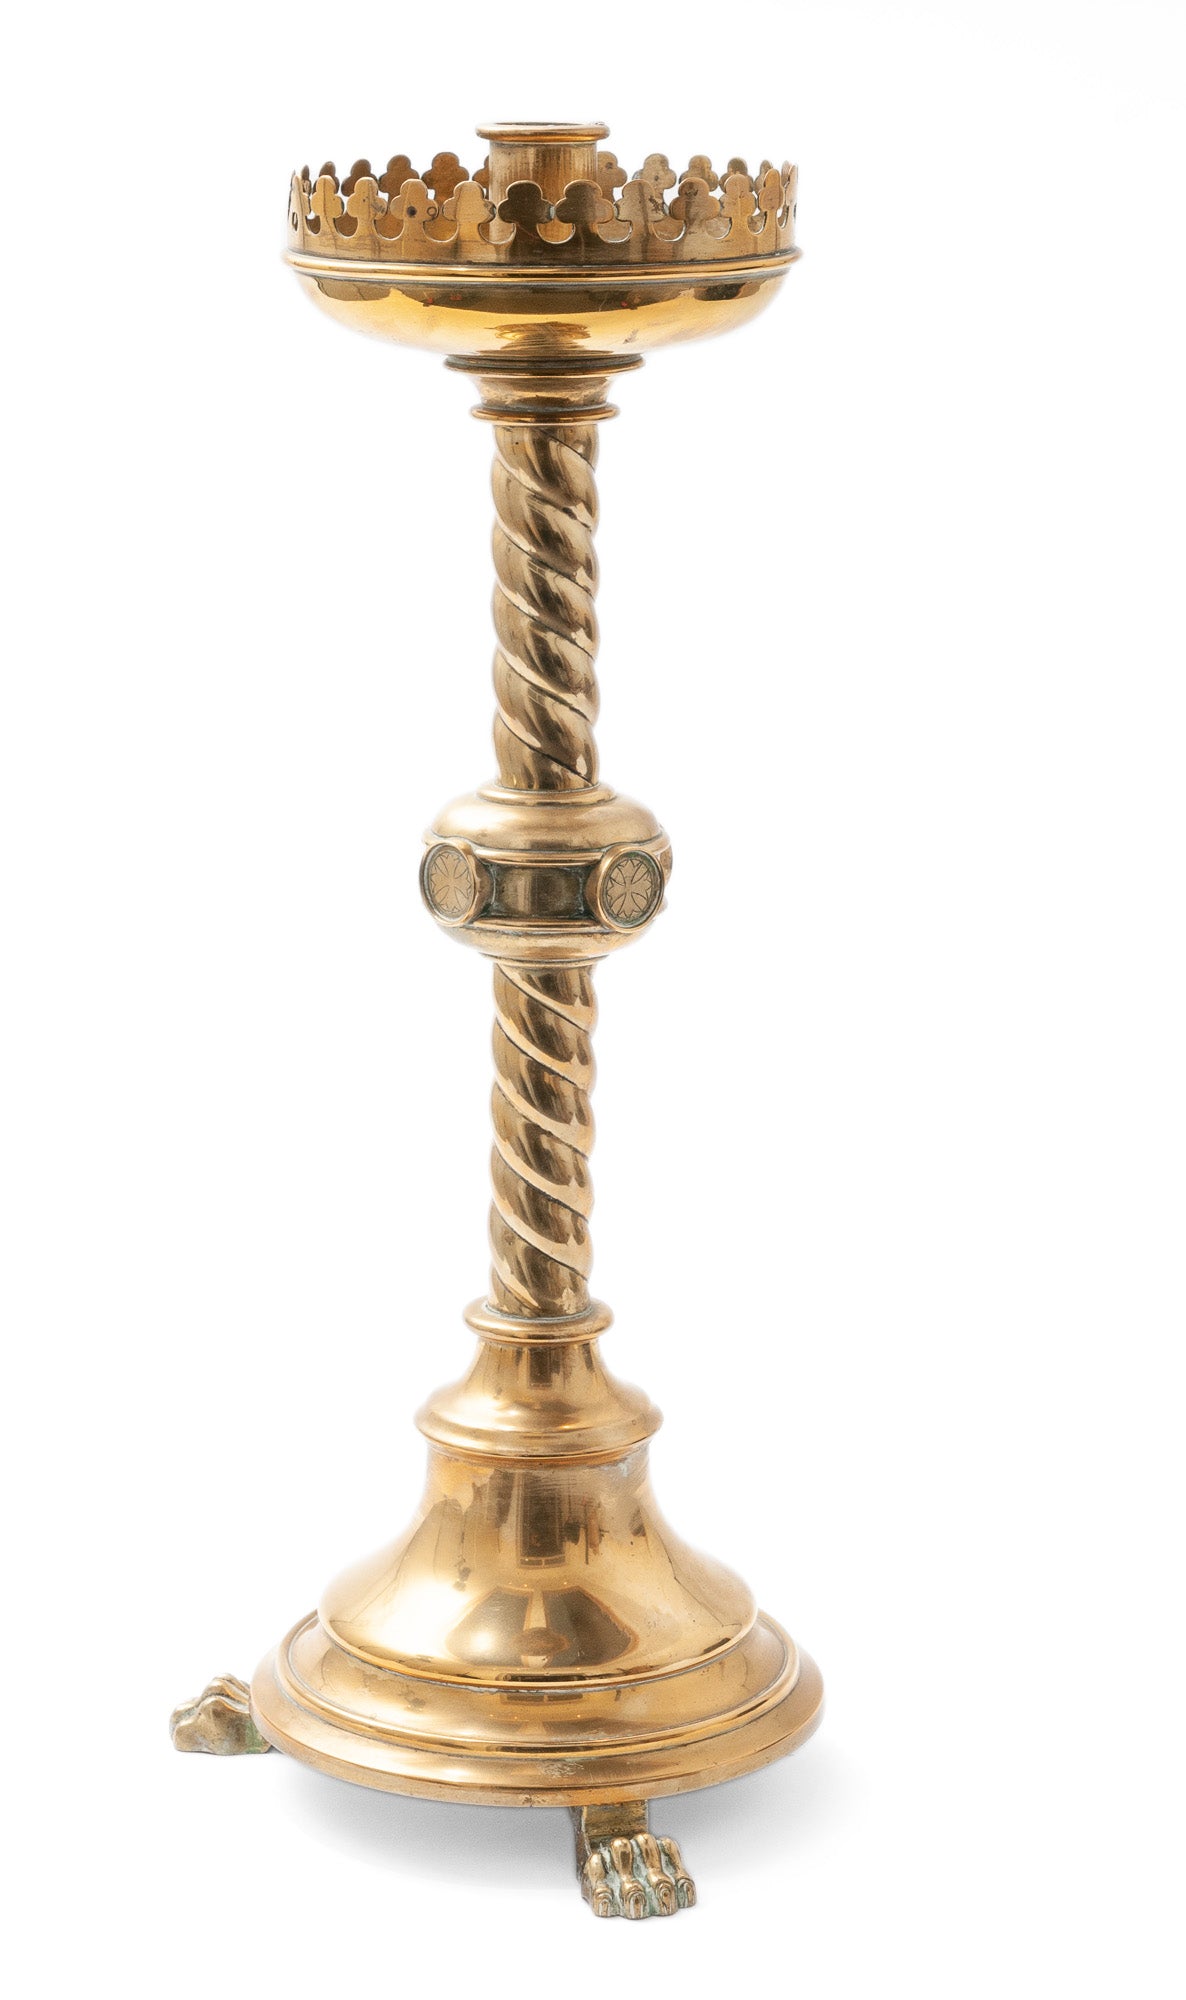 Antique 19th Century Large Brass Ecclesiastical Barley Twist Candlestick (Code 1556)